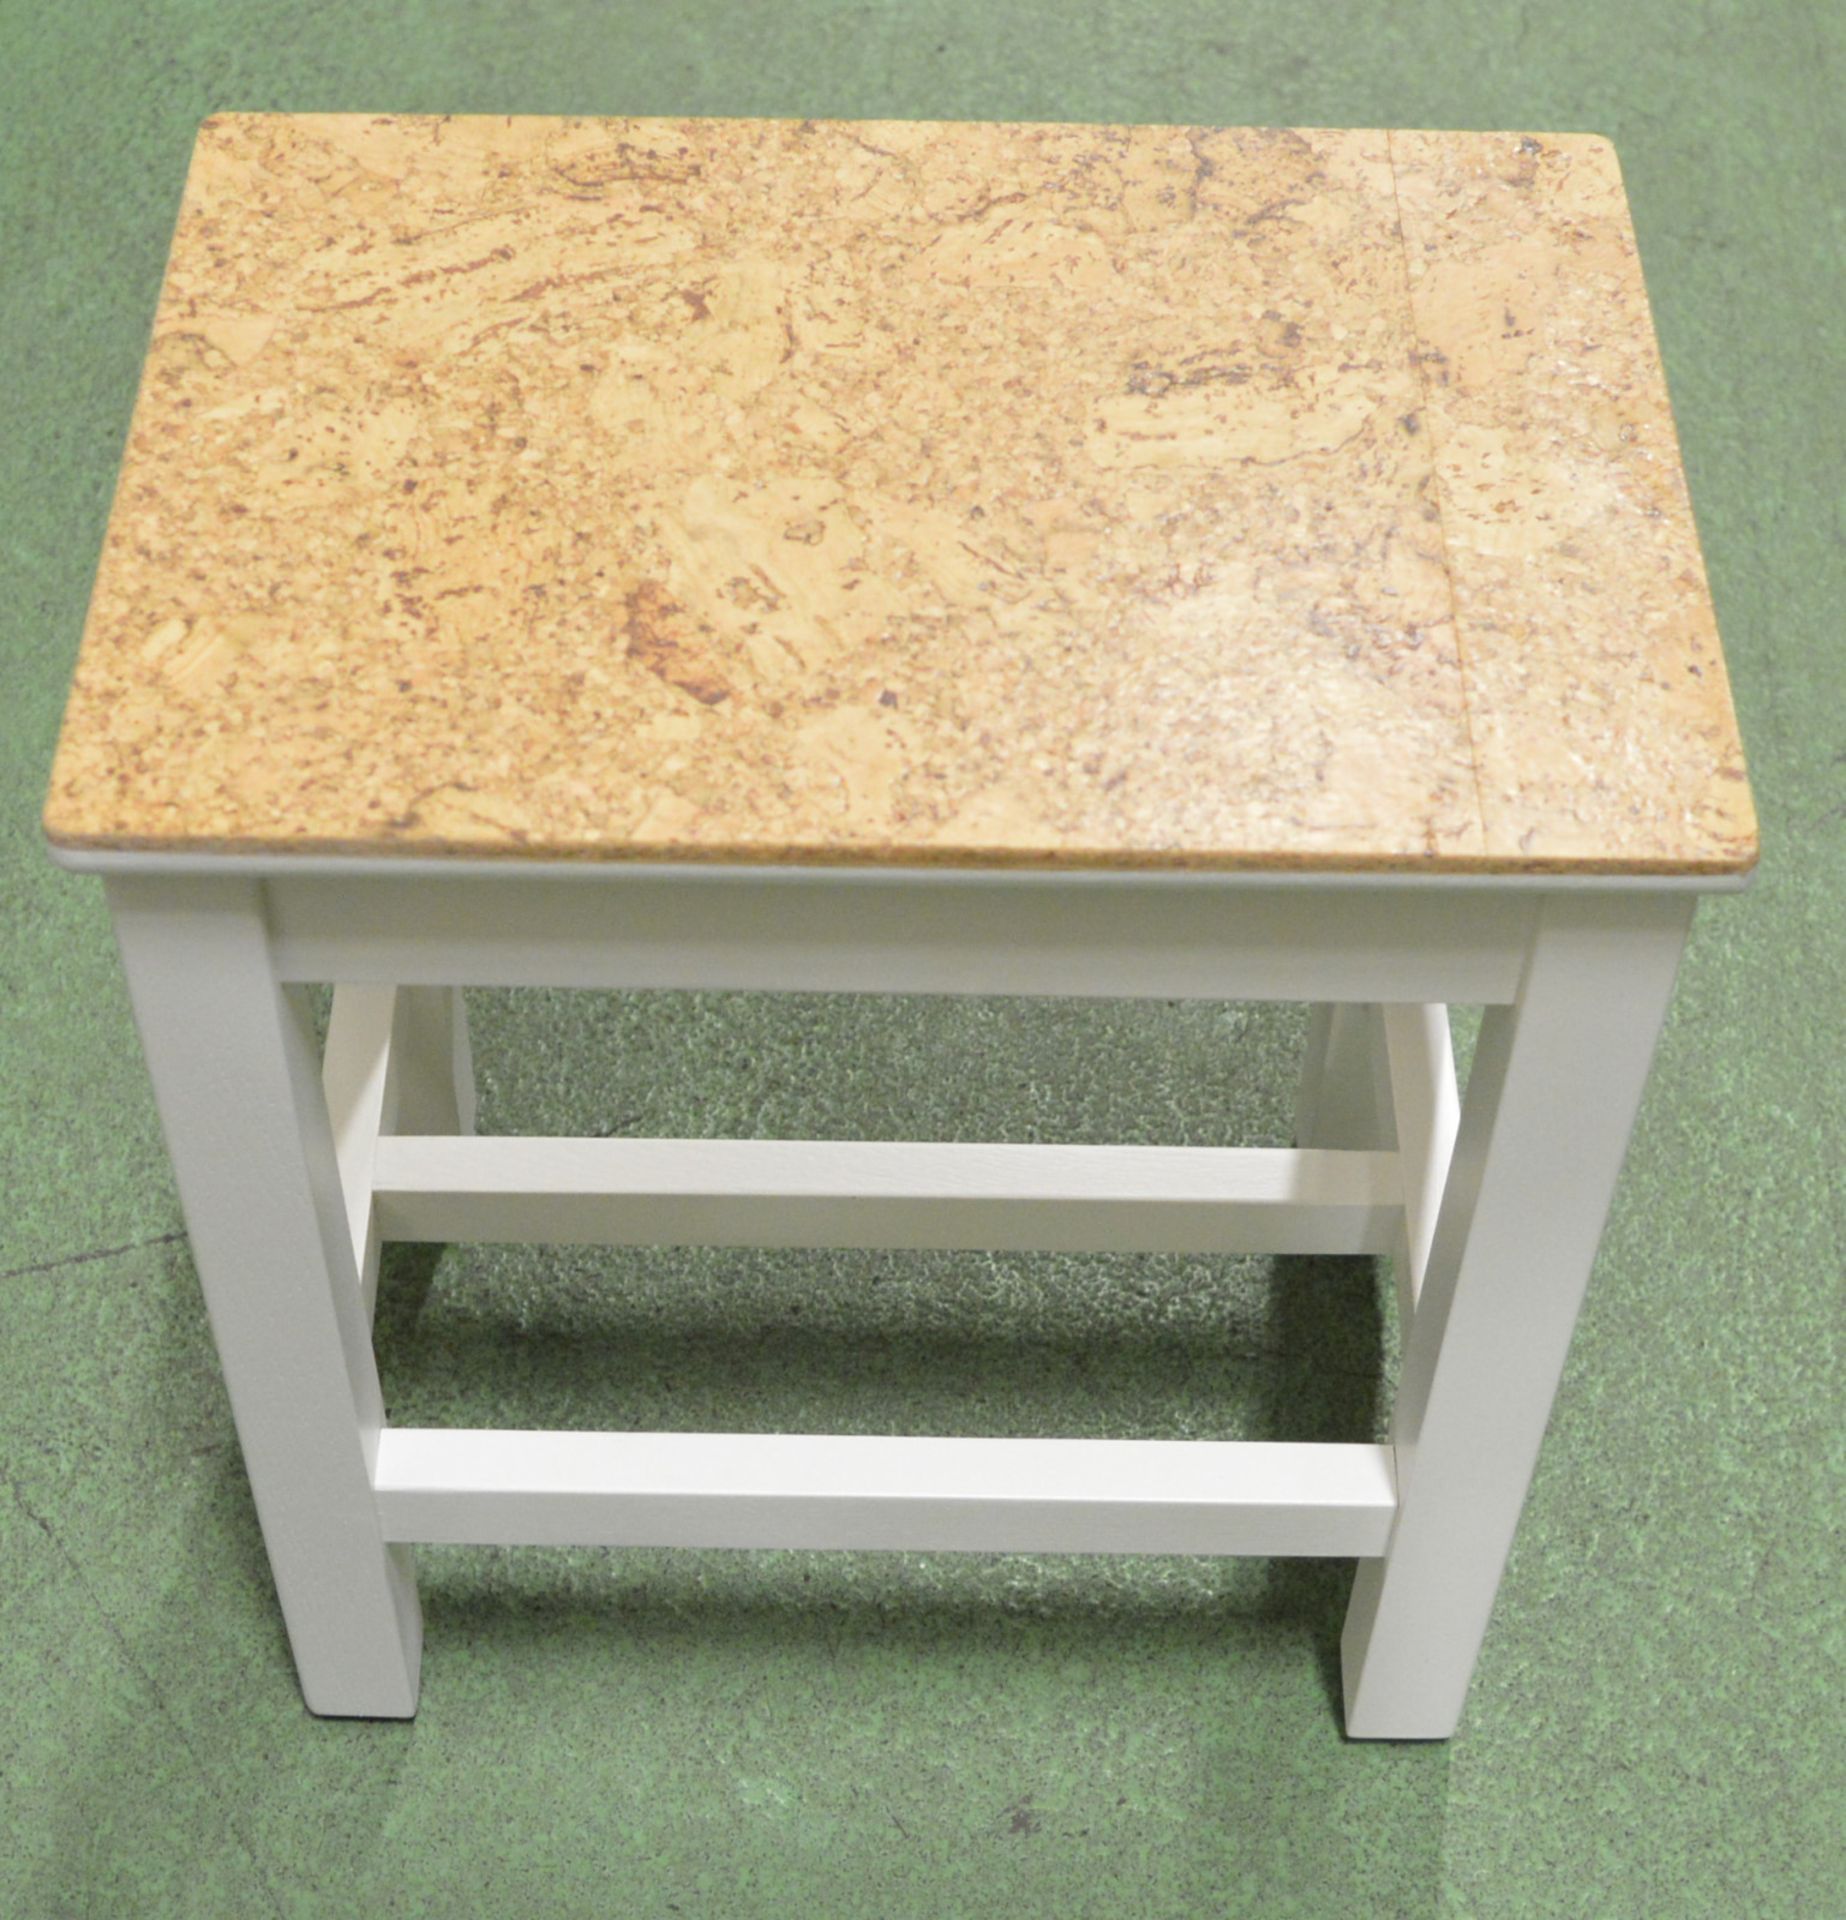 2x Bathroom Stools - White Painted Legs with Cork Seat - Brand new in box. - Image 2 of 2